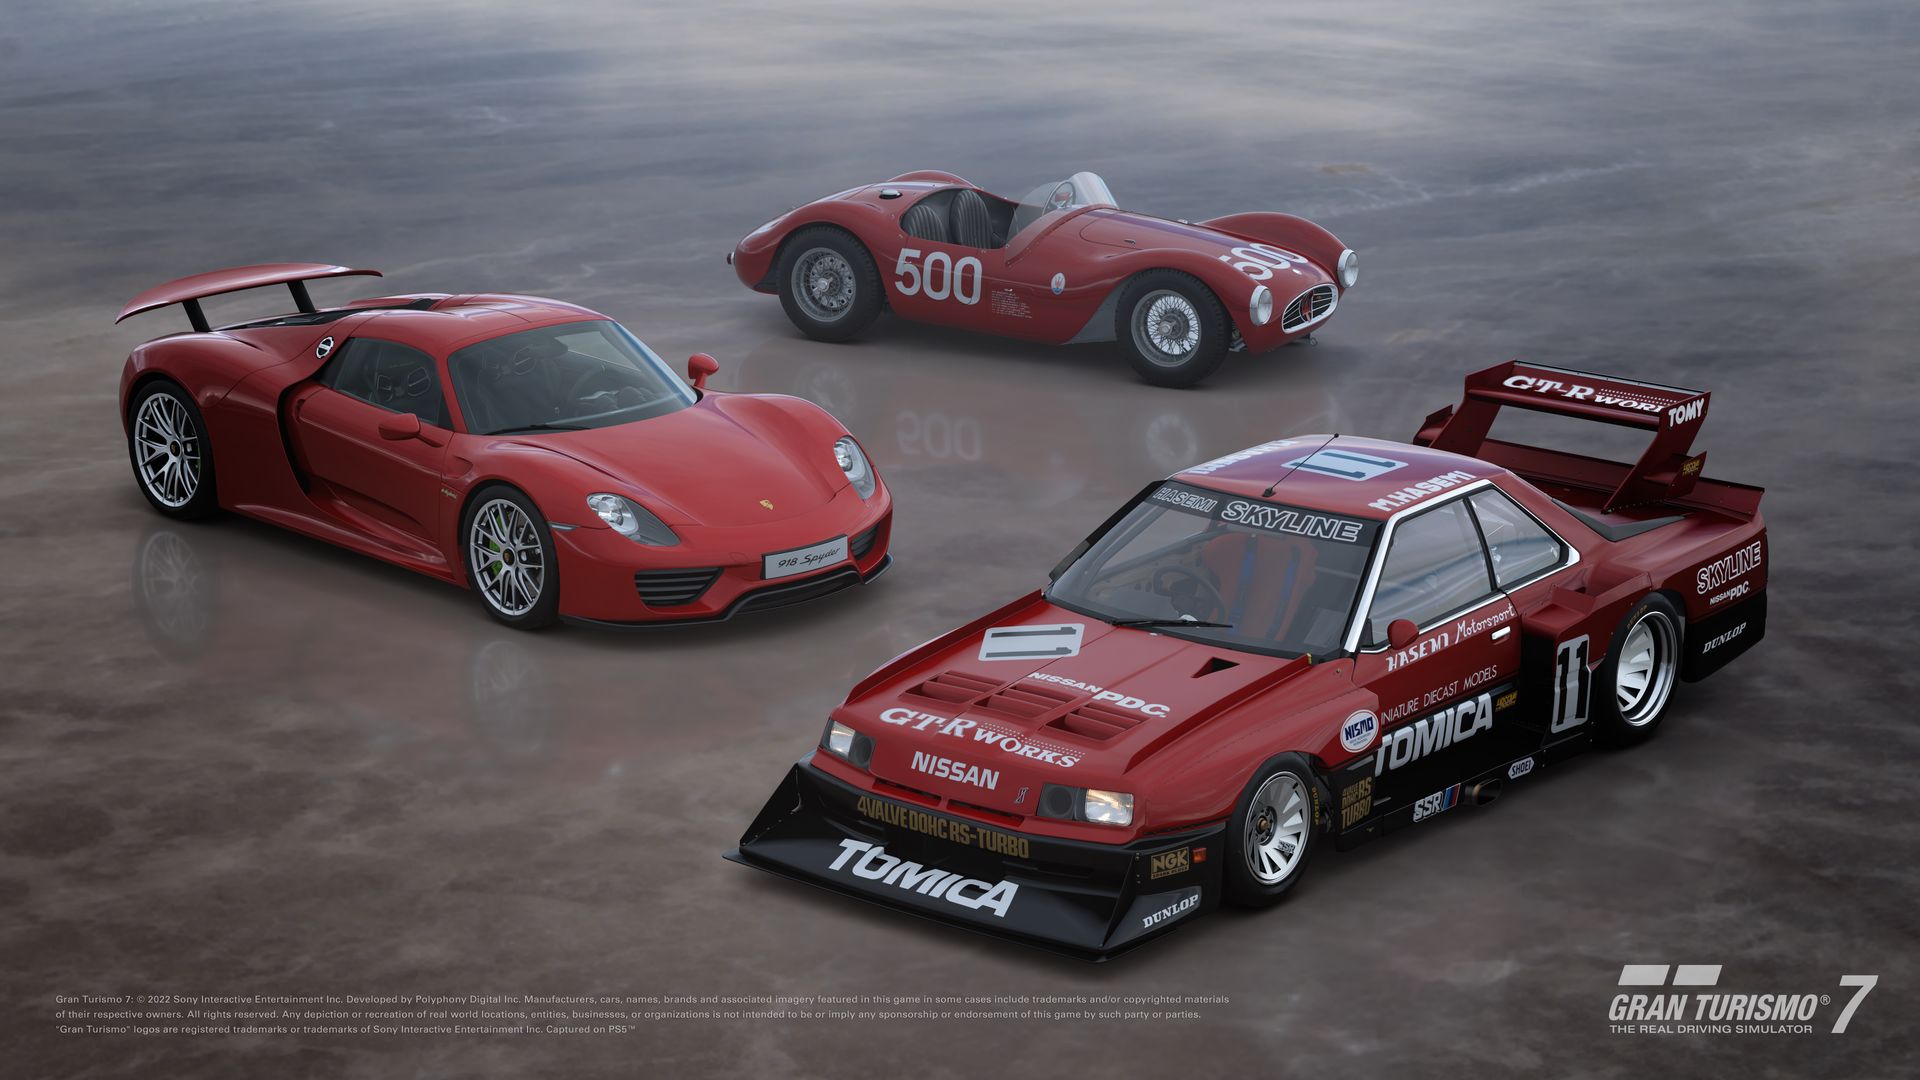 The Gran Turismo 7 July Update Three New Cars, Including Classic Race